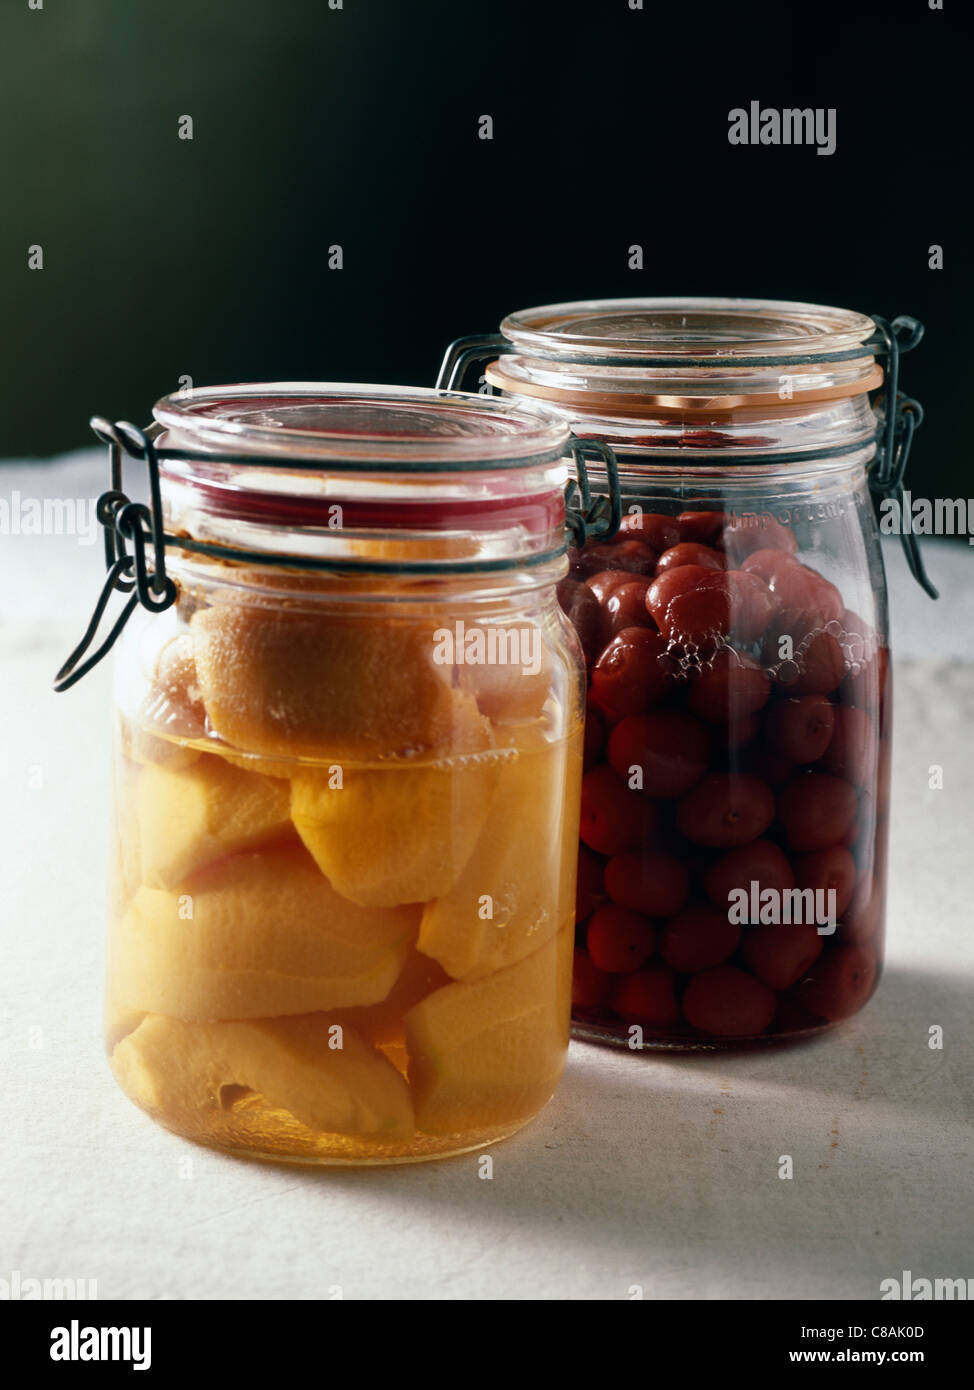 Jars of fruits in syrup Stock Photo